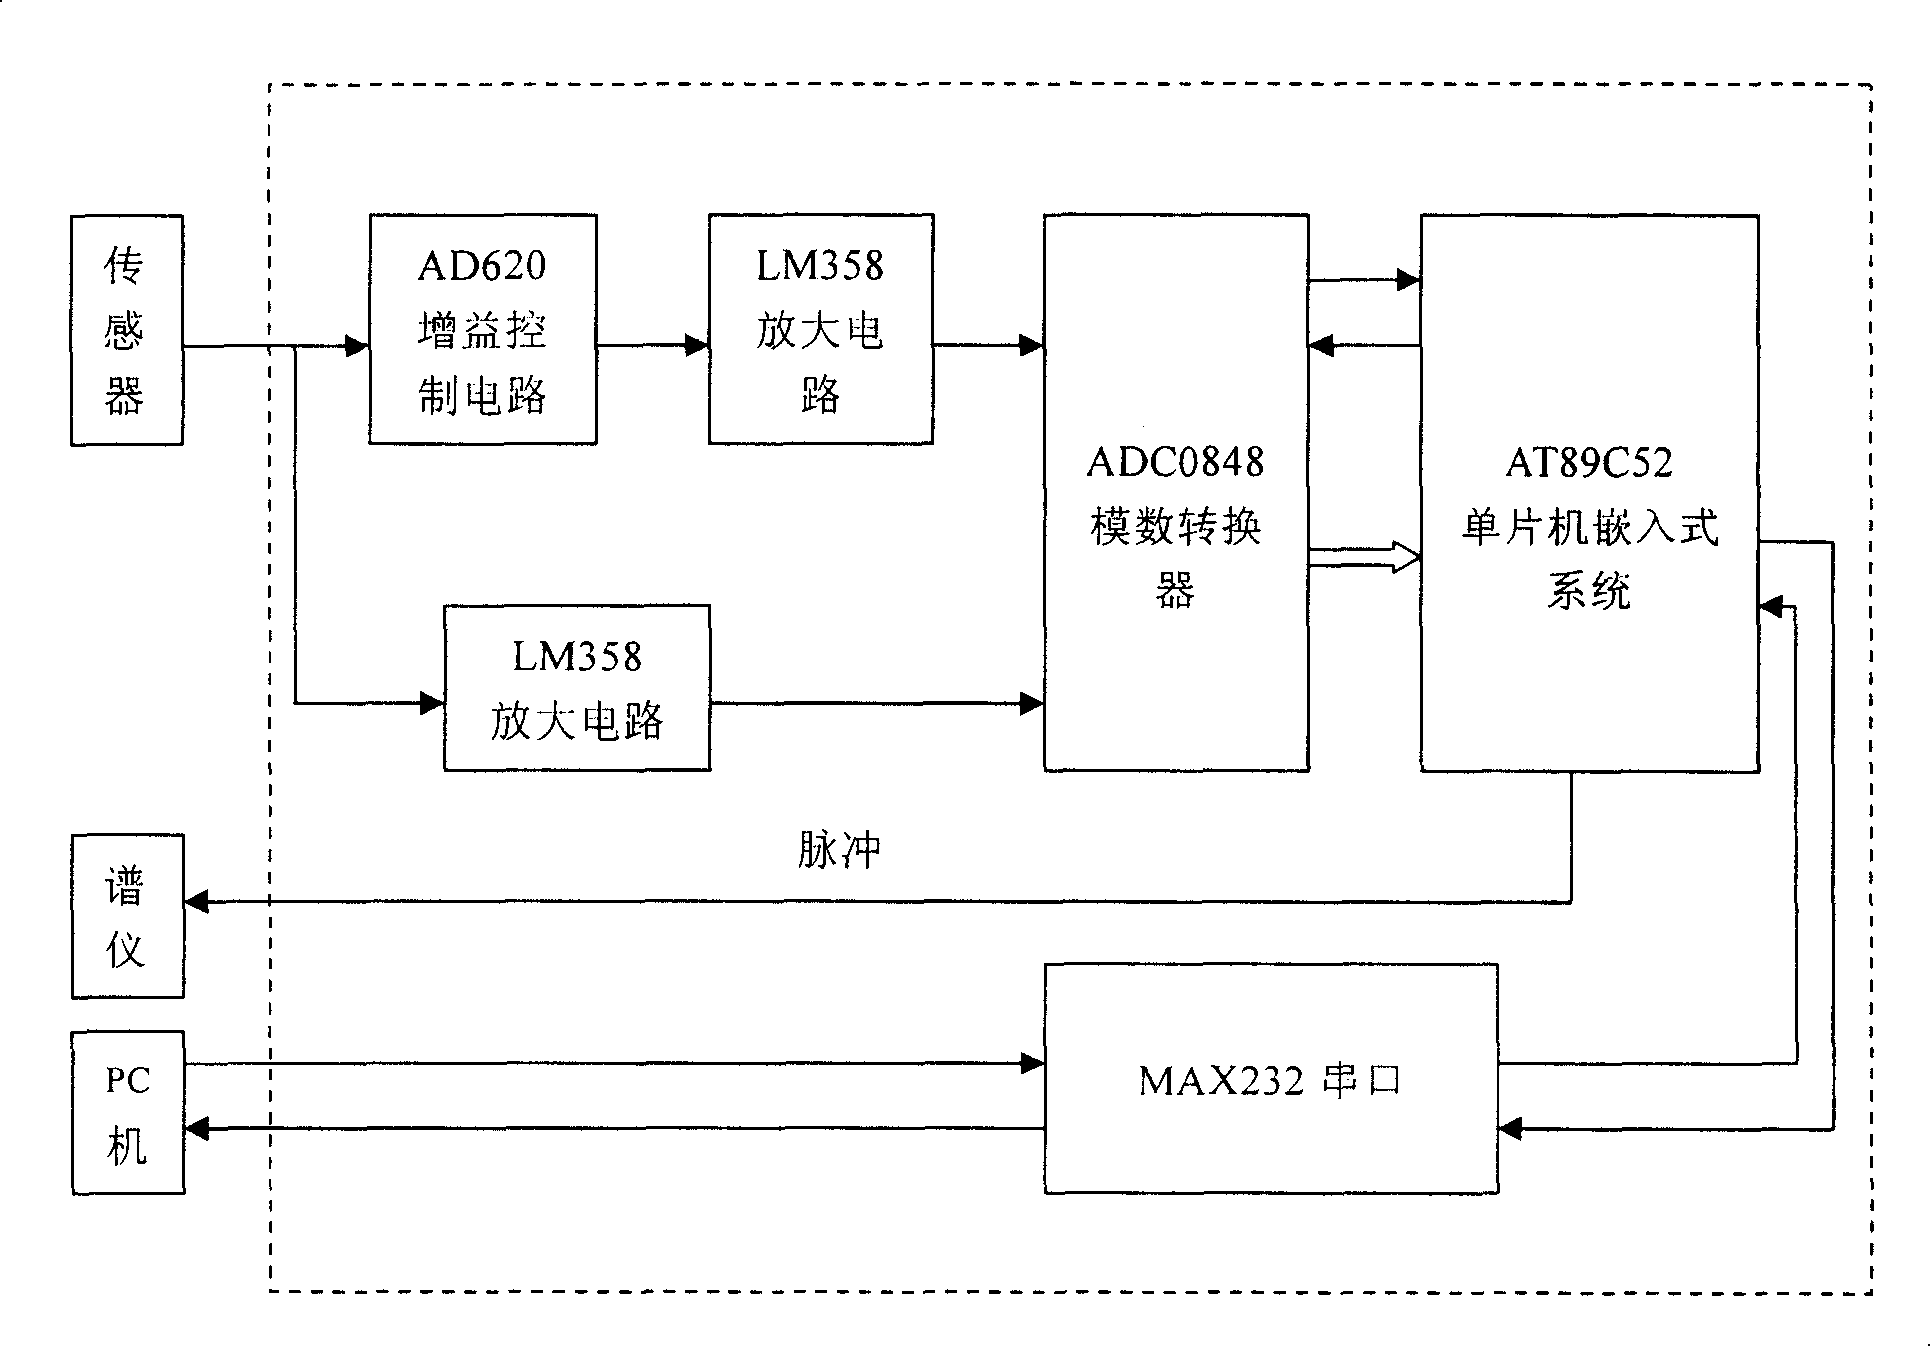 Respiration /ECG gated apparatus for magnetic resonance image-forming system